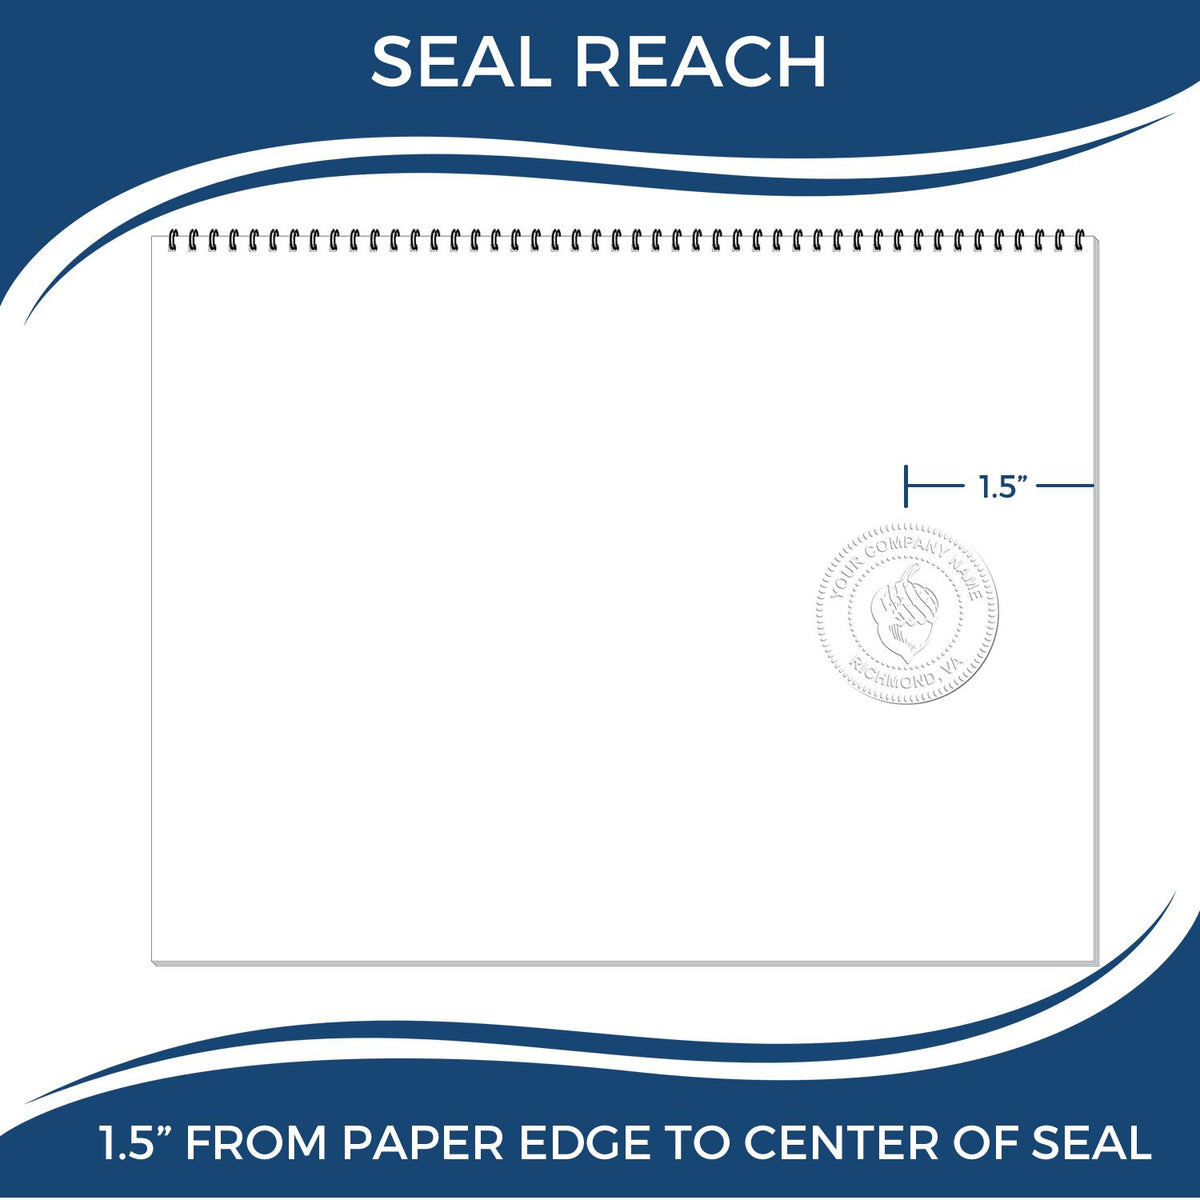 An infographic showing the seal reach which is represented by a ruler and a miniature seal image of the Handheld Kansas Professional Geologist Embosser